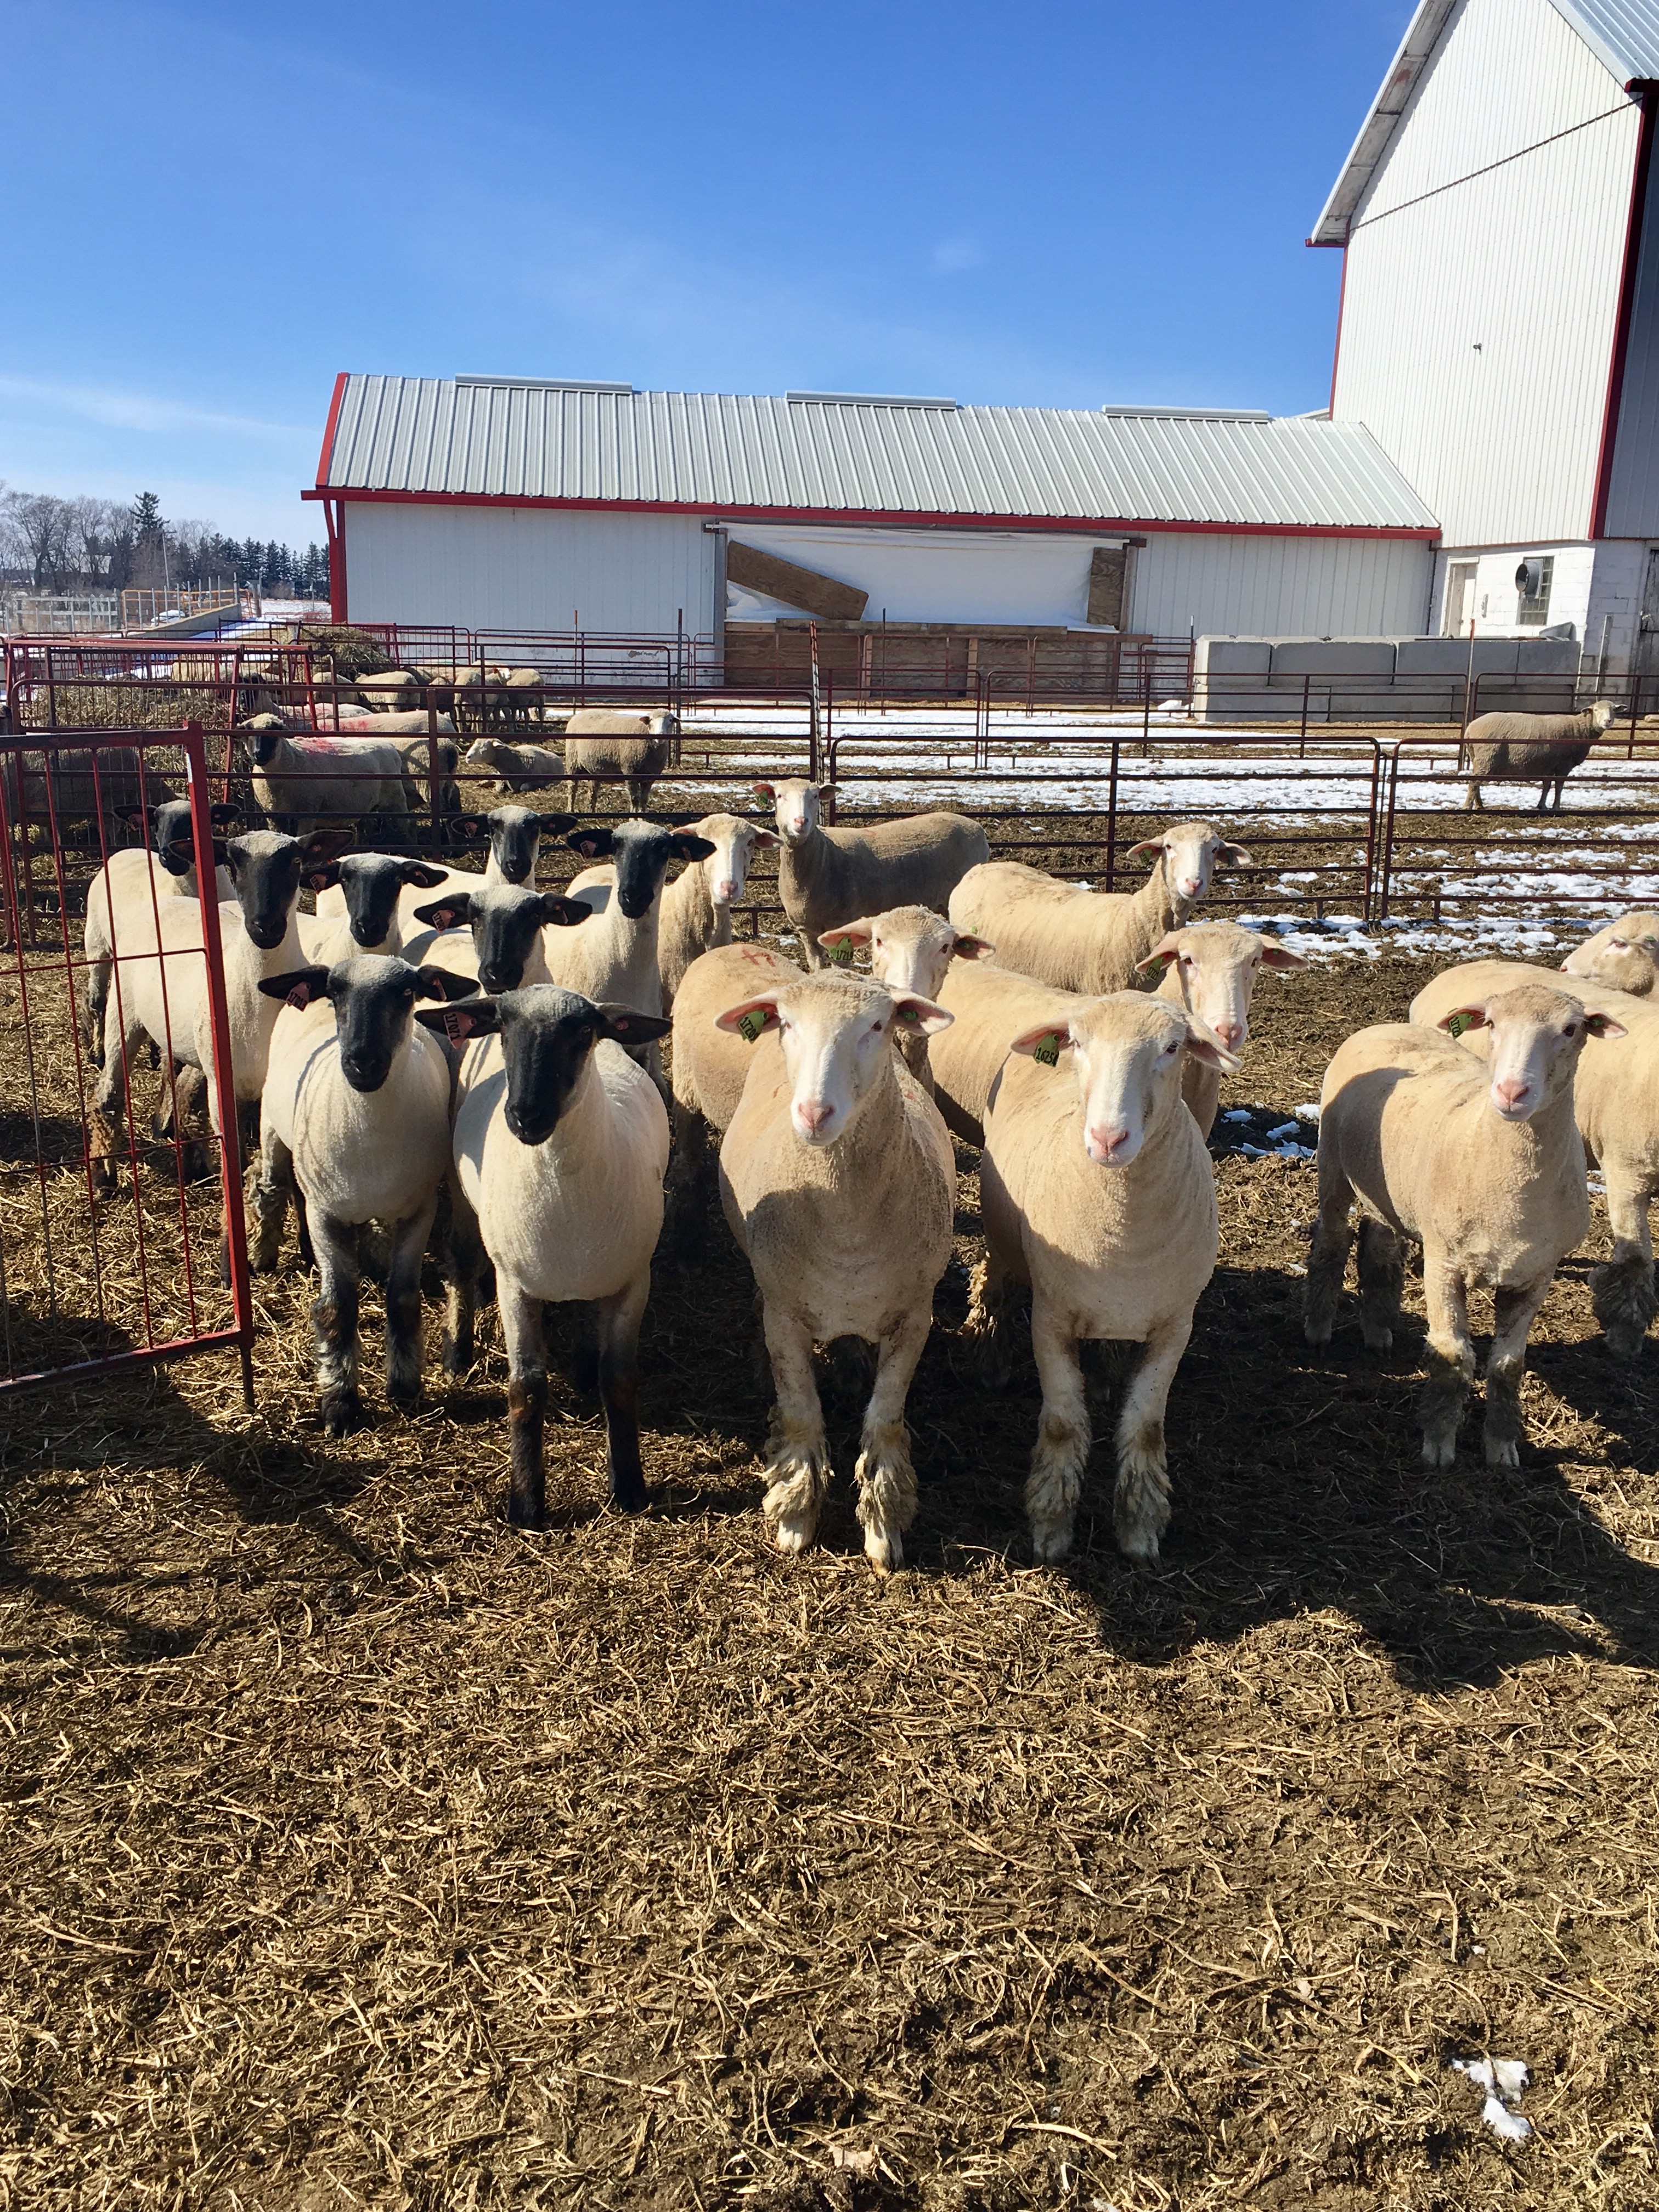 Producers will learn how ultrasounding and carcass measurements can shape ram selection and breeding programs during an NDSU Extension workshop April 26. (NDSU photo)